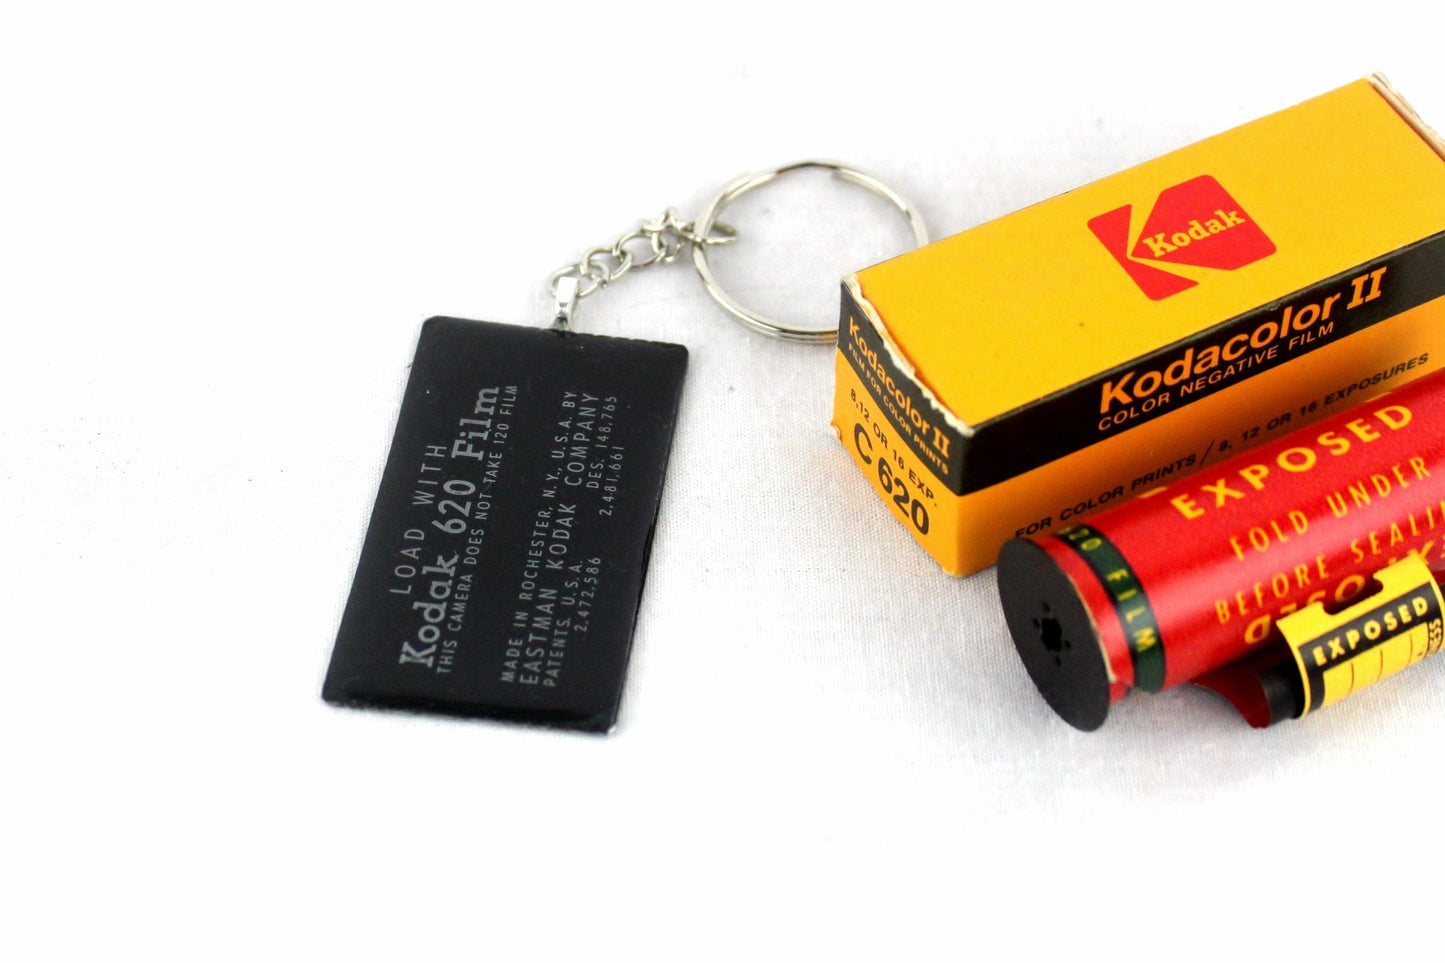 LightAndTimeArt Keychains Black Vintage Kodak 620 Roll Film Keychain, unique gifts for him and her, Photographer gift, eco-friendly